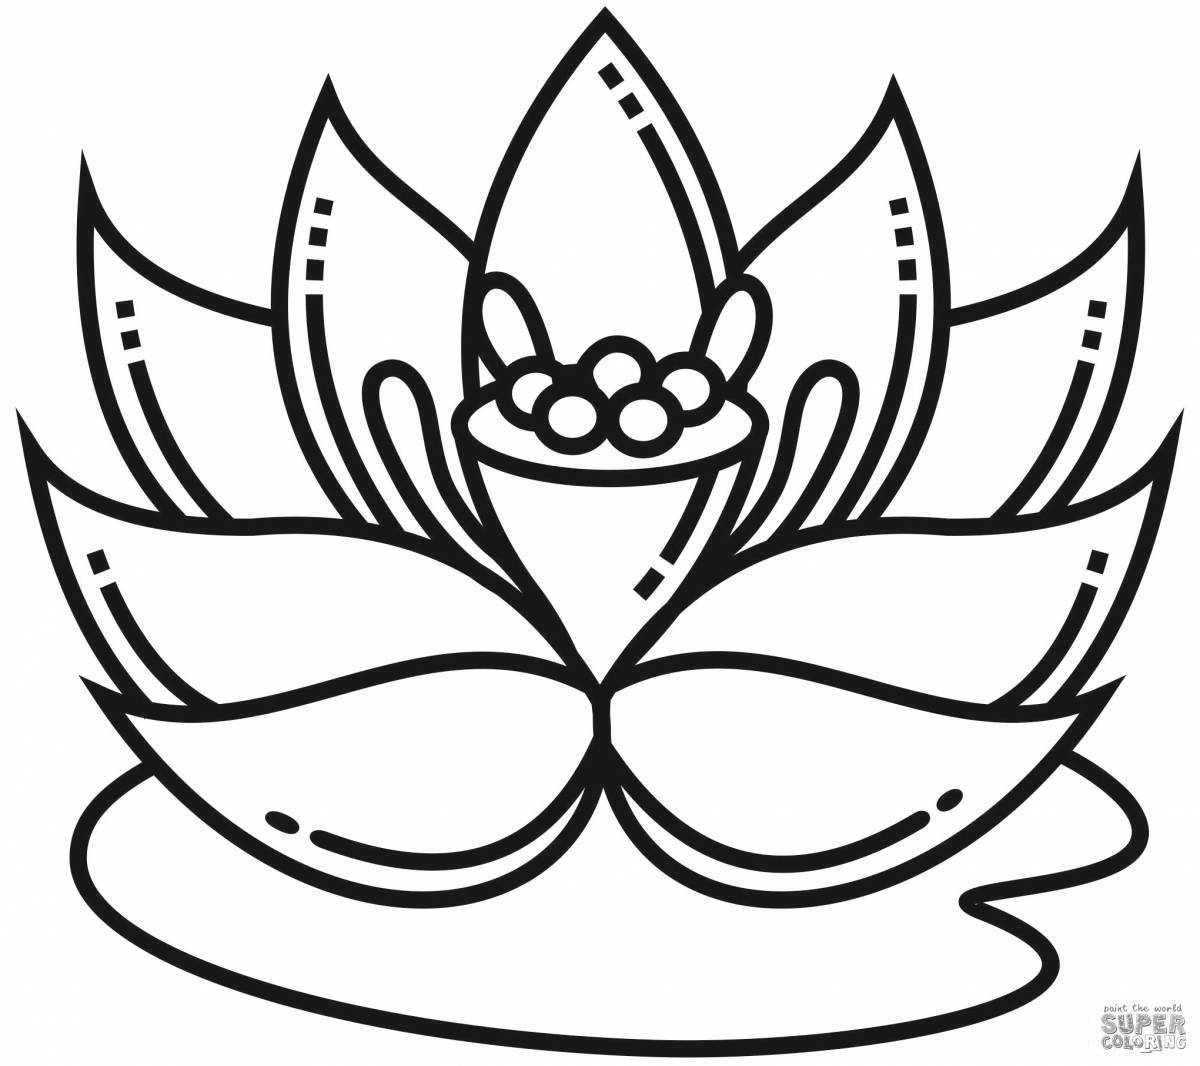 Gorgeous lotus coloring book for kids